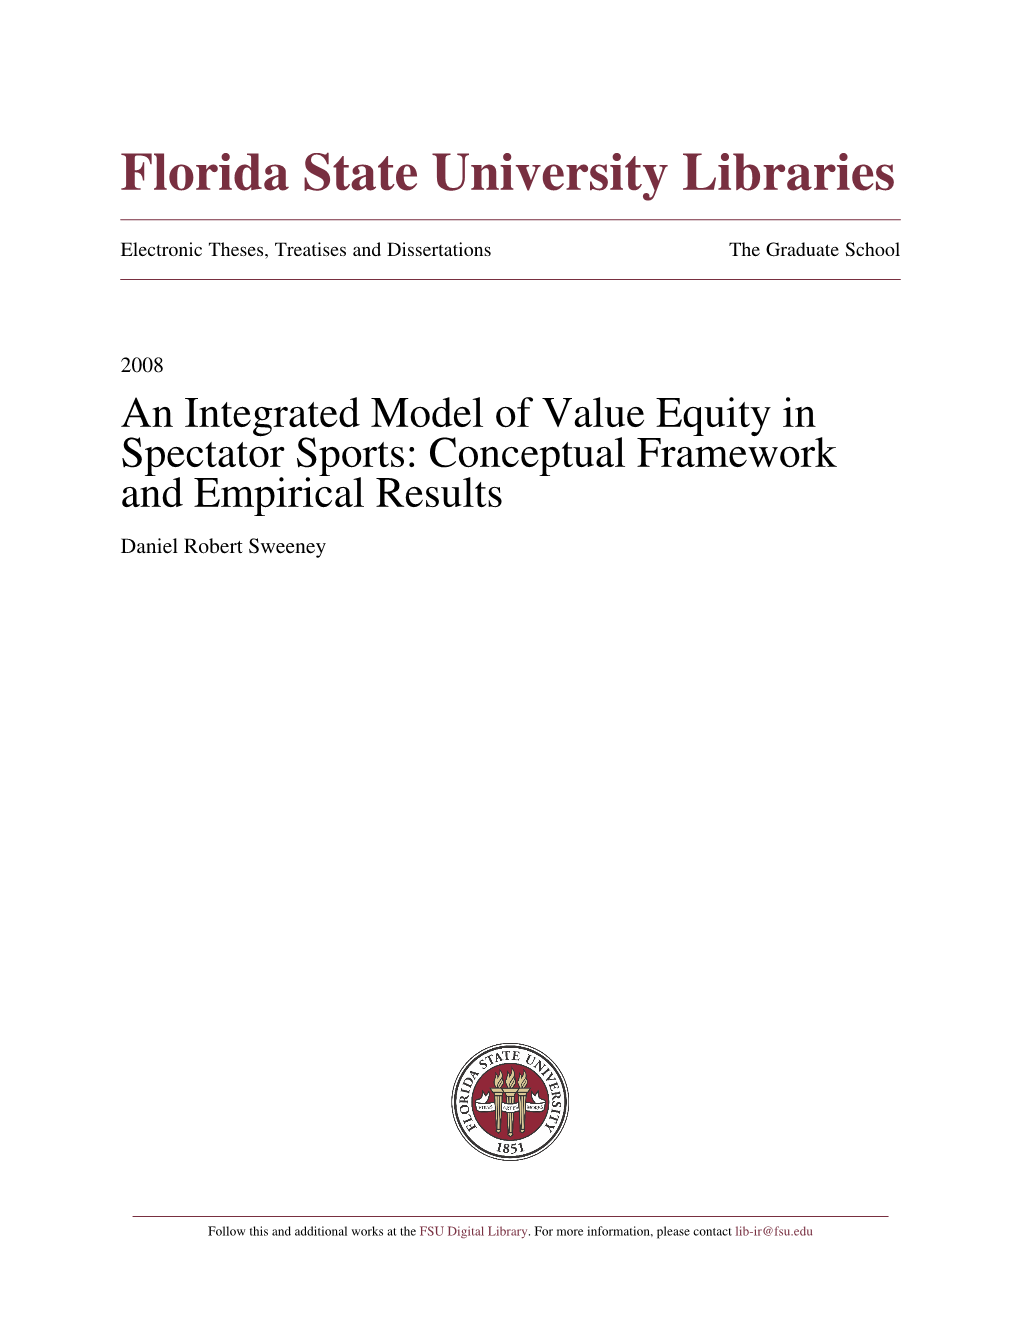 An Integrated Model of Value Equity in Spectator Sports: Conceptual Framework and Empirical Results Daniel Robert Sweeney